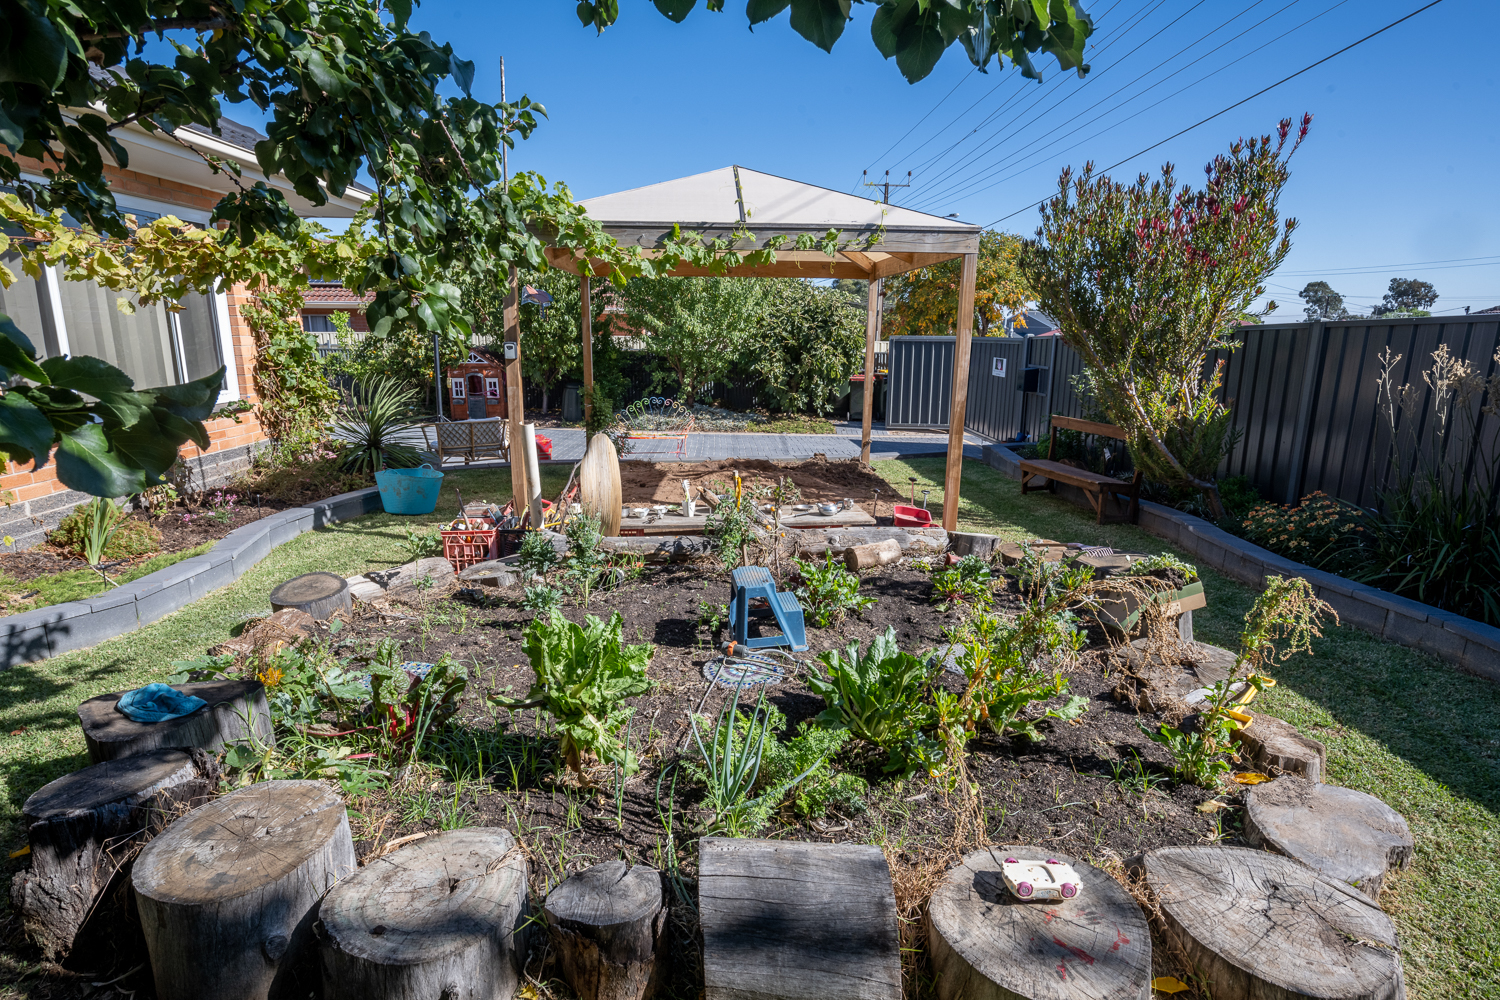 family day care setting – backyard with large outdoor vegetable patch